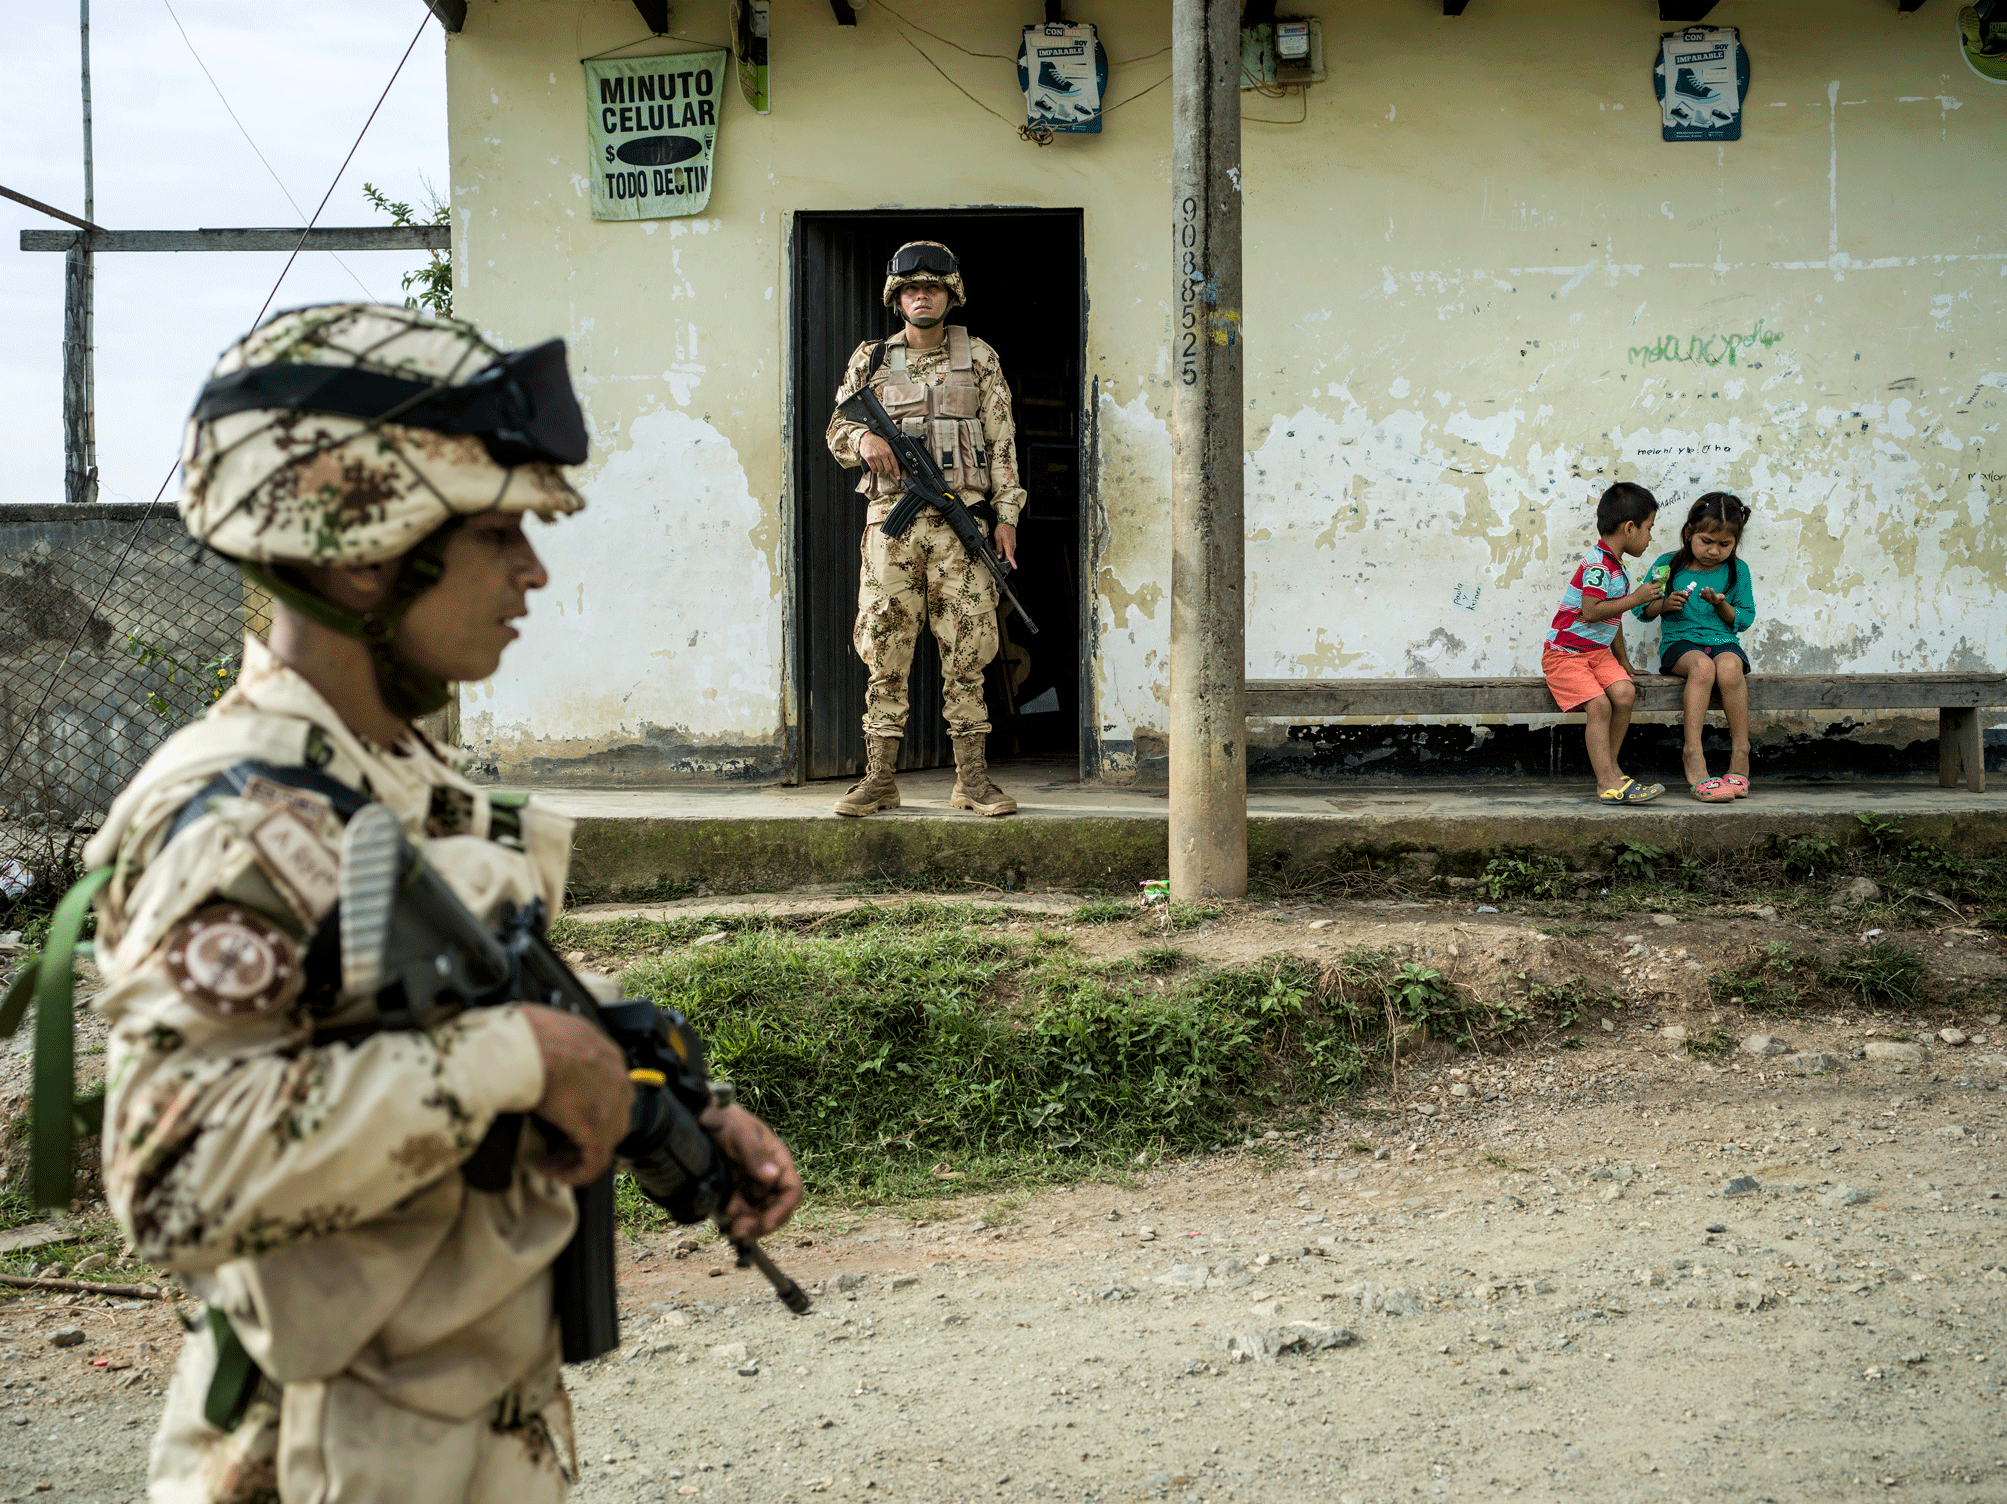 Armed soldiers from the Colombian national army stationed near Corinto as part of the UN mission as prescribed by the peace accord between the Colombian government and the FARC